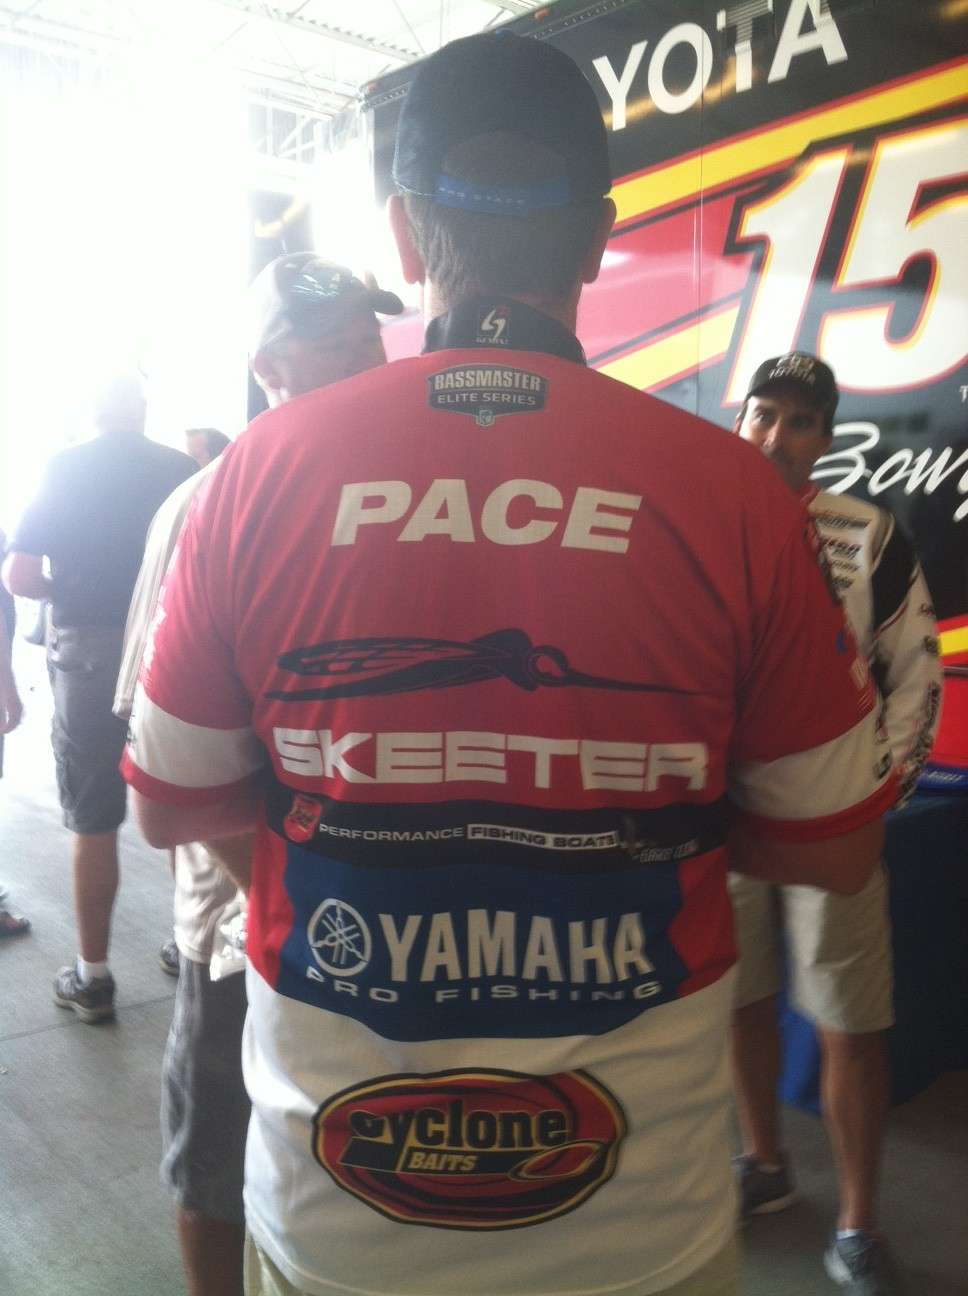 Look who's back! We'll have more on Cliff Pace's return to fishing soon on bassmaster.com.